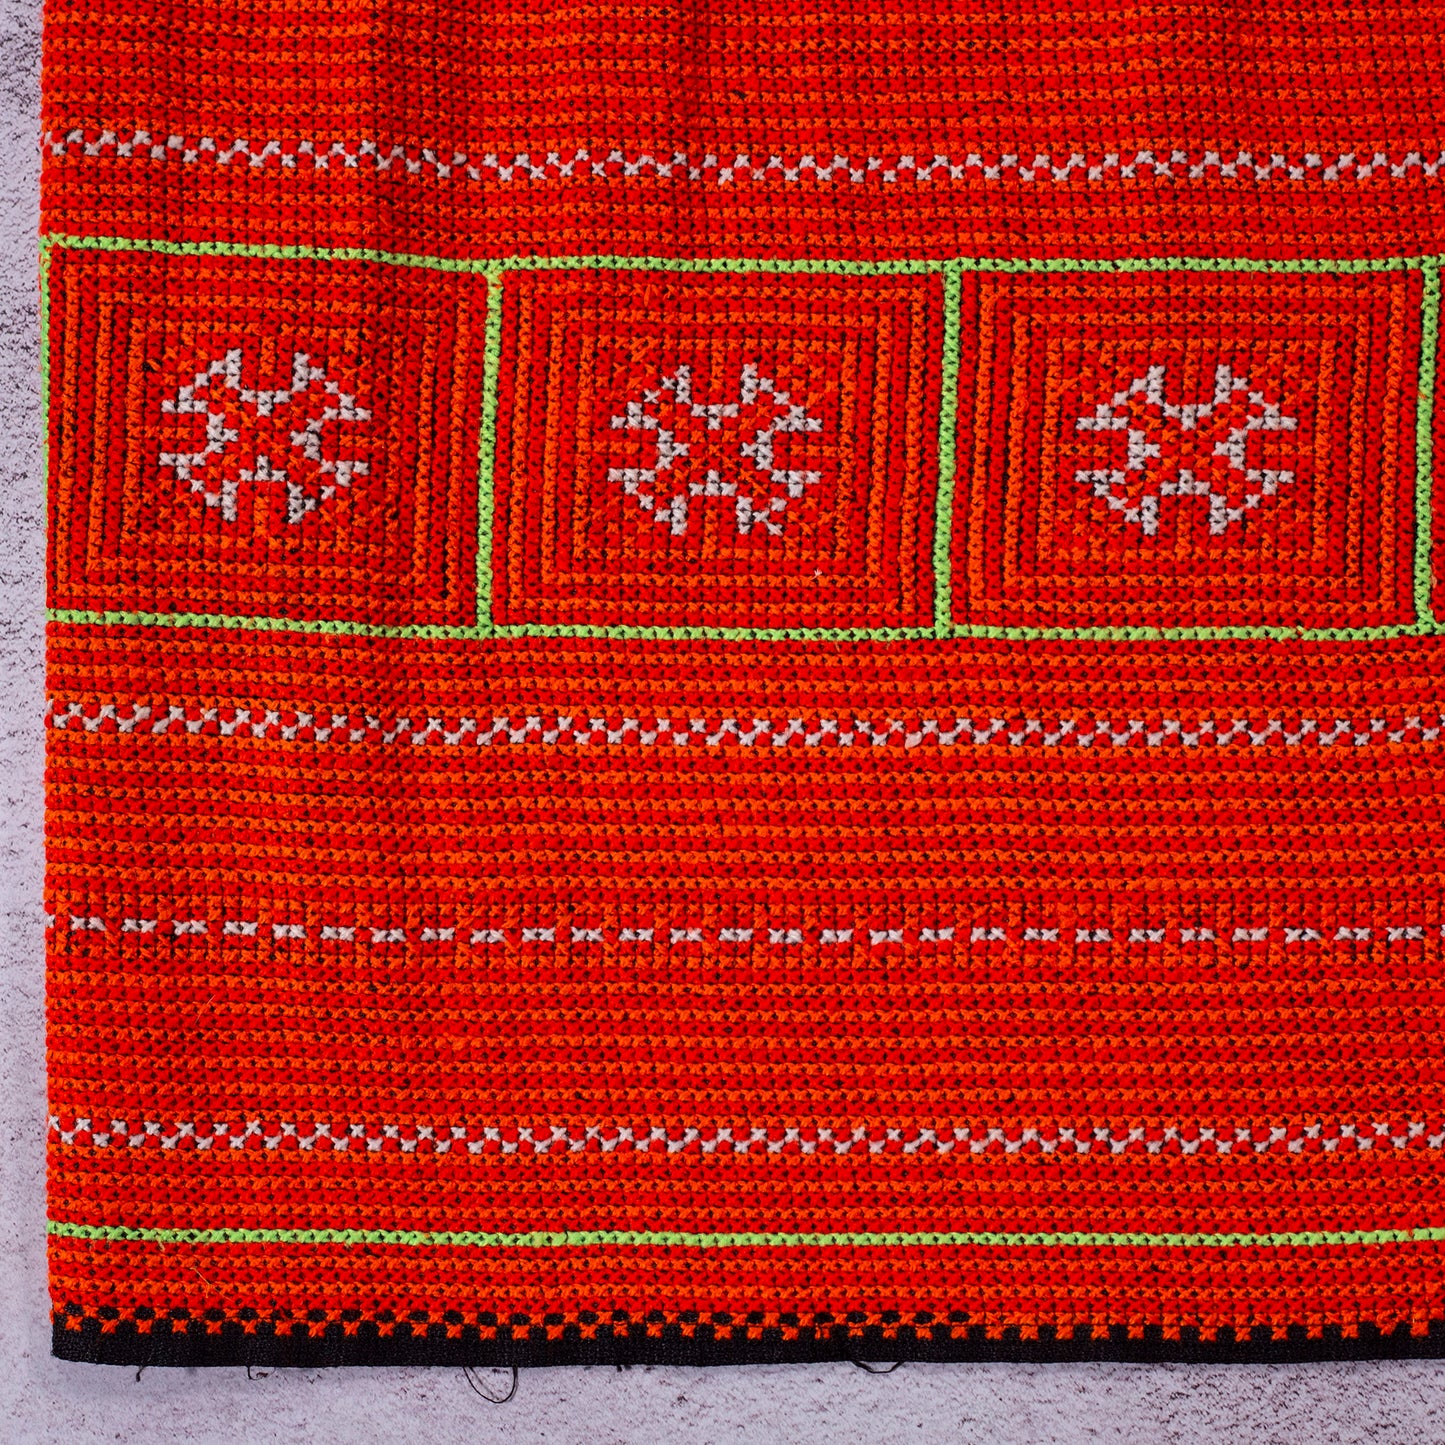 Red H'mong embroidery fabrics, handmade, cross-stitched embroidery